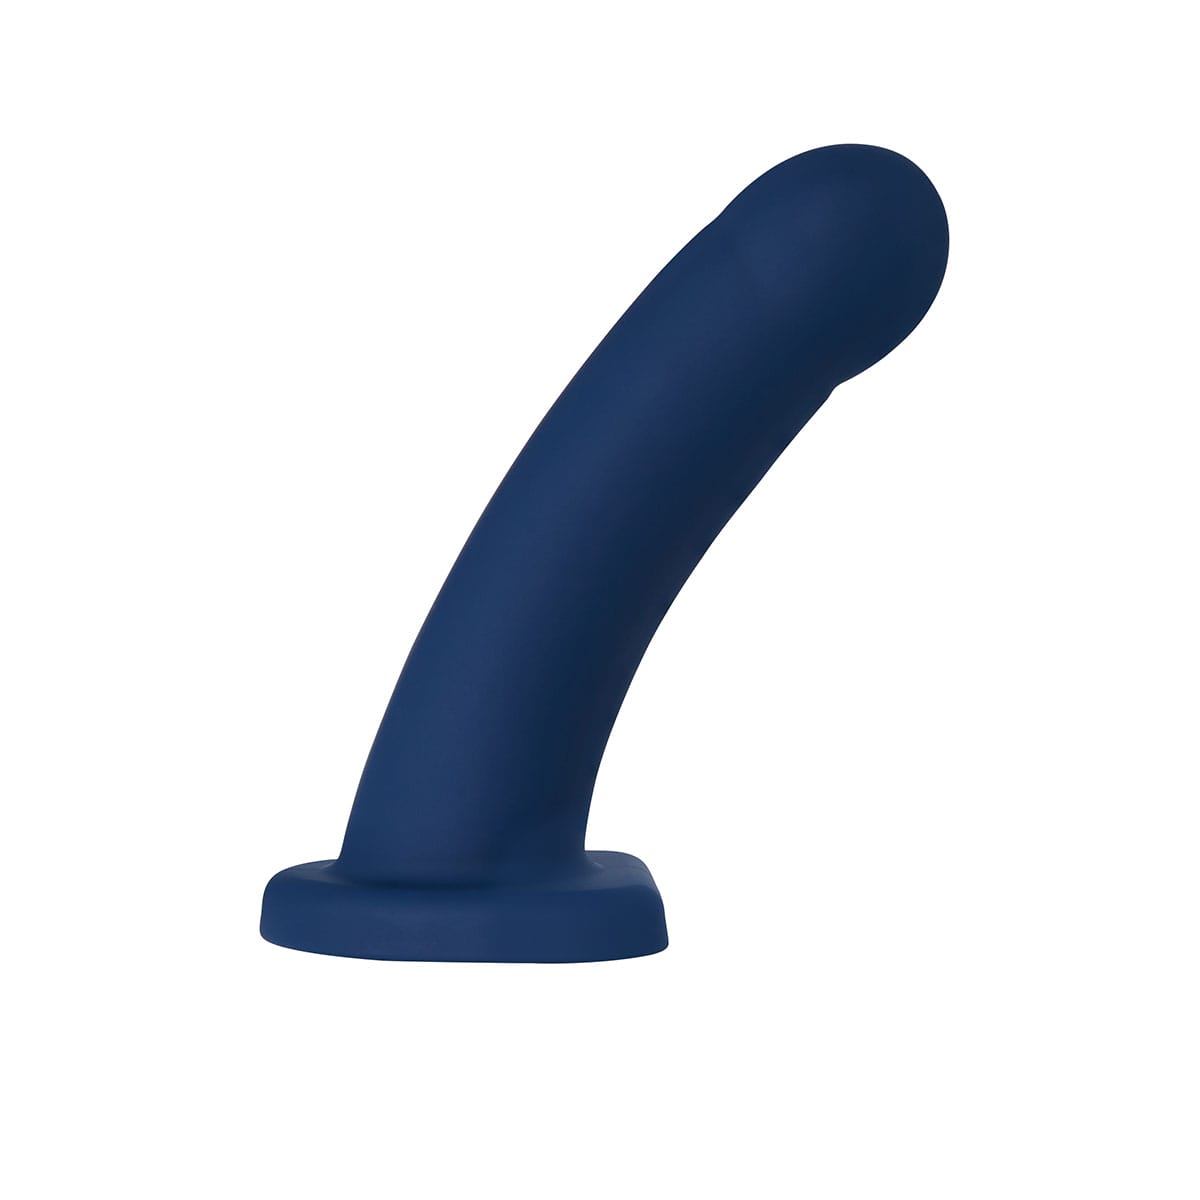 Buy Nexus Hollow Dil Banx 8  Inch    Navy  long and 2.00 thick dildo made by Sportsheets.